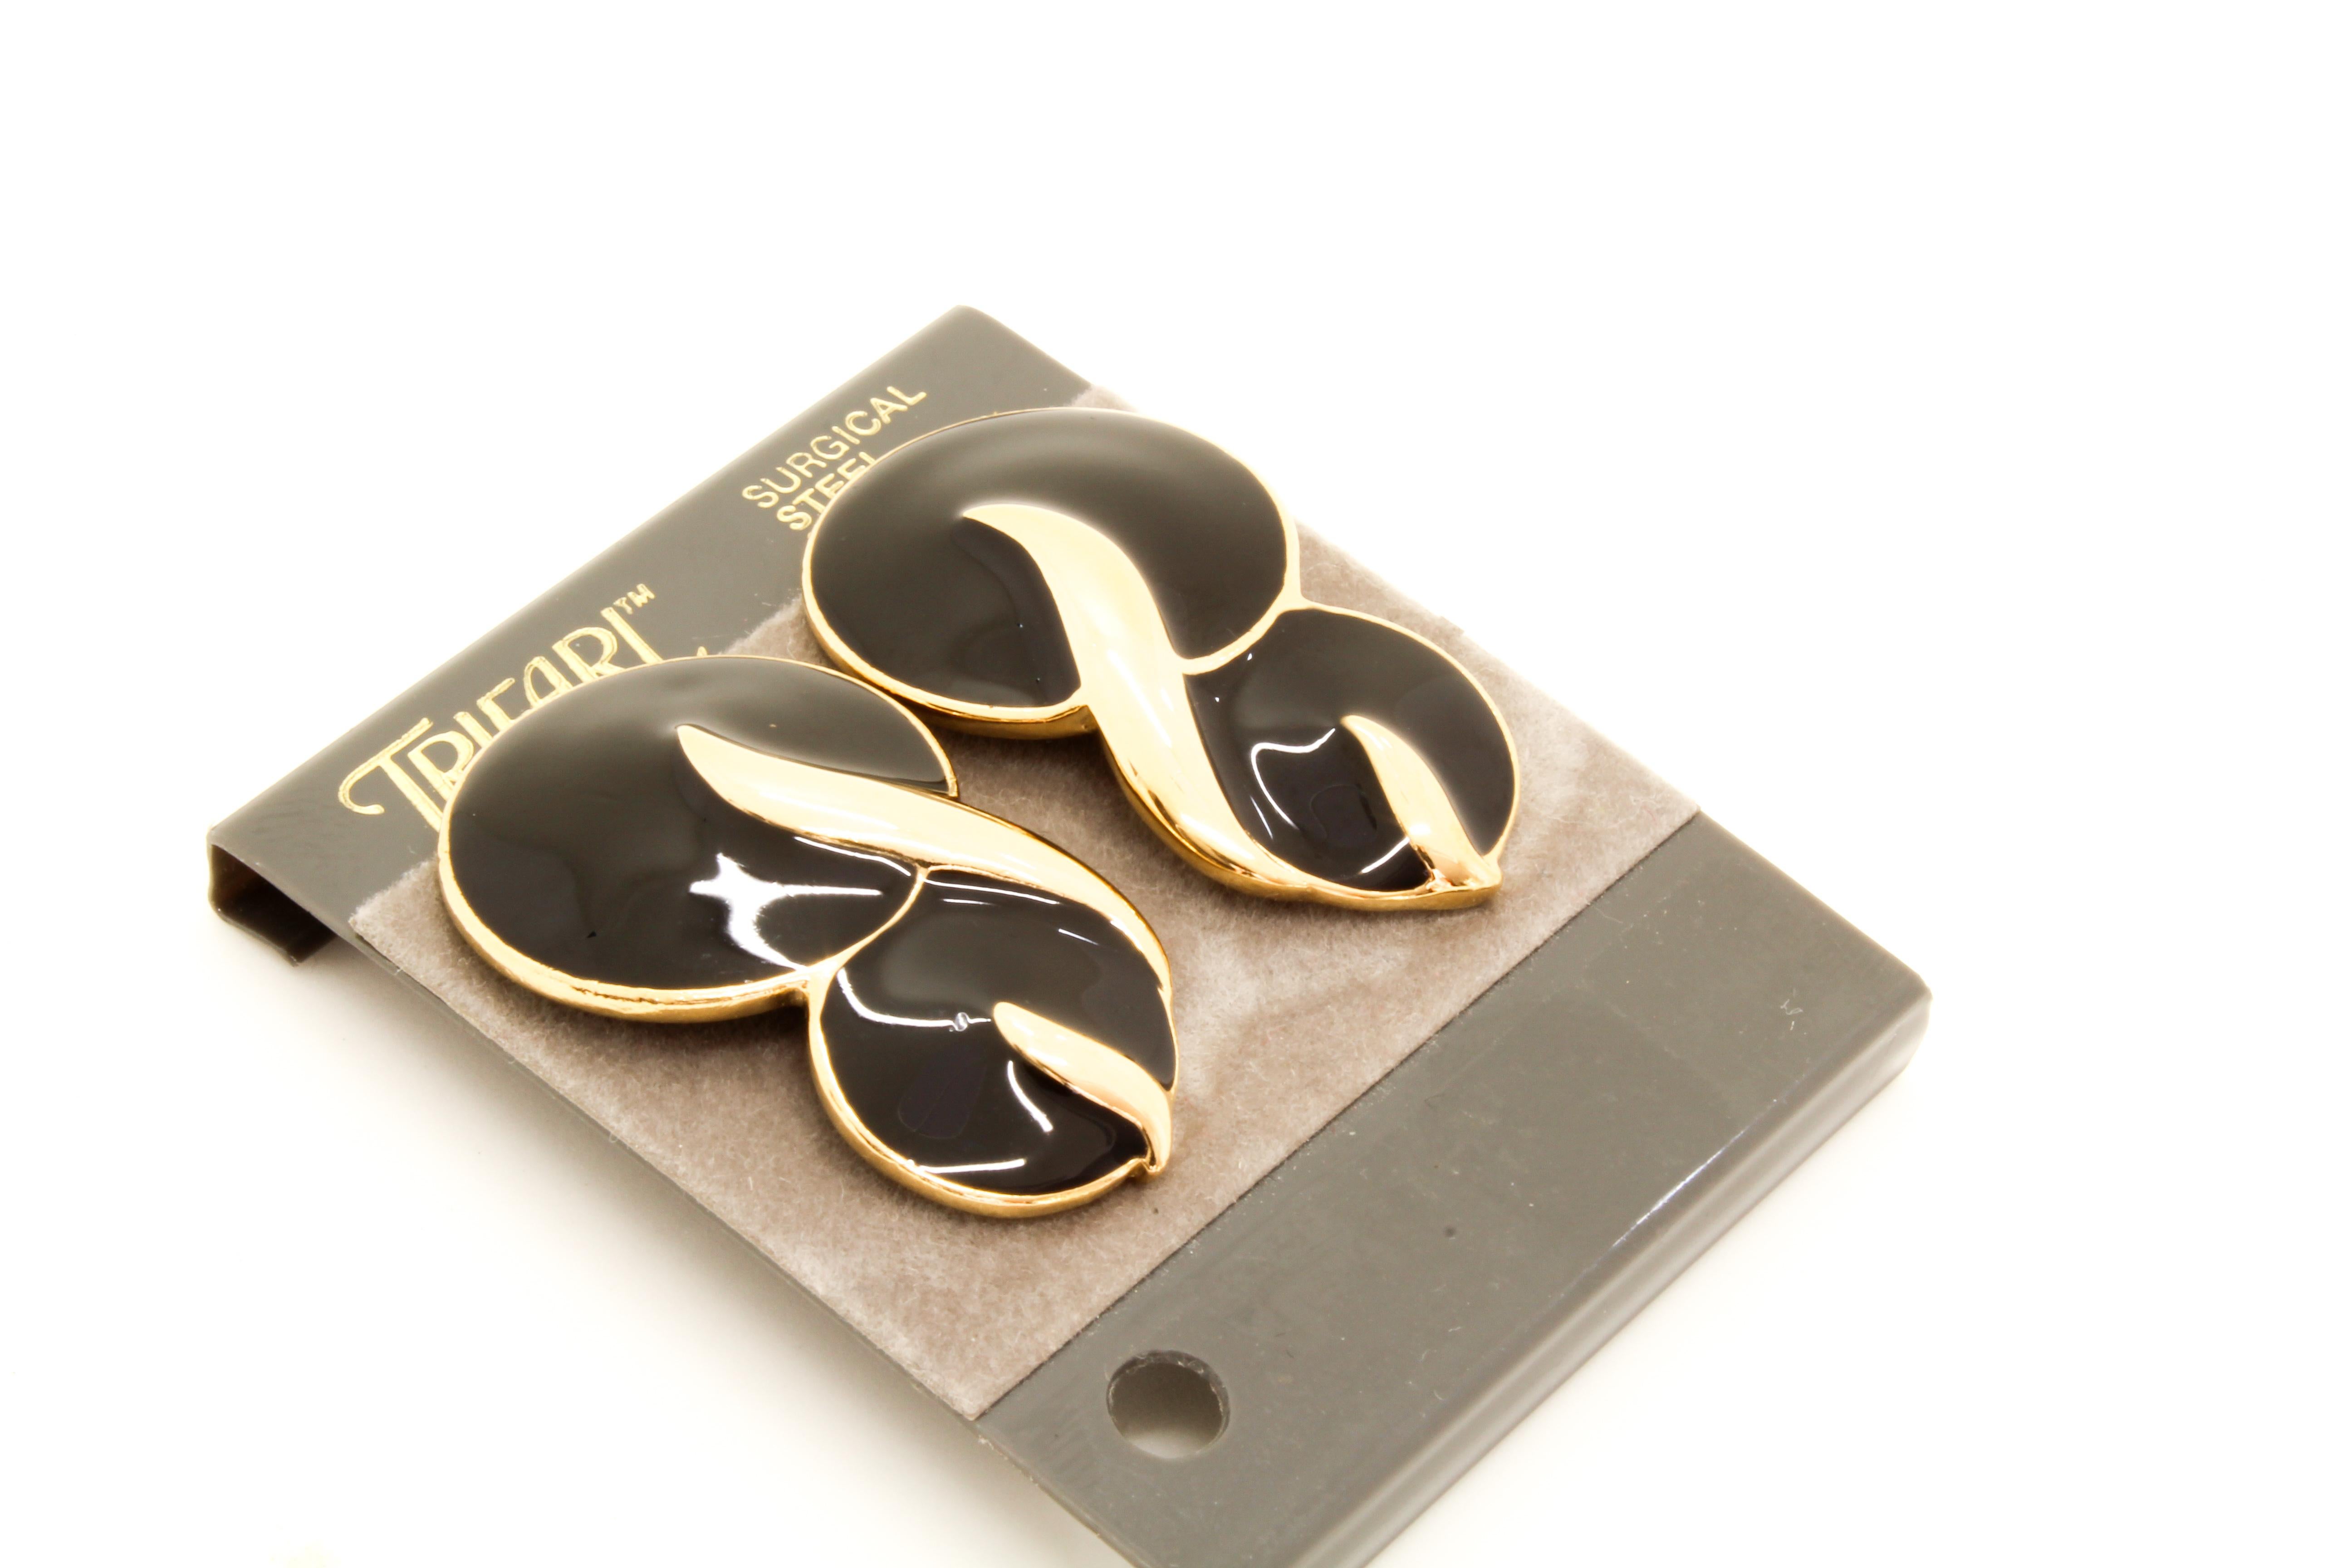 Fab 1980s vintage mint condition unworn Trifari statement earrings for pierced ears.  

Classic 80s Trifari style with black enamel discs encased in goldtone metal.

Approx 3.5 cms X 2 cms